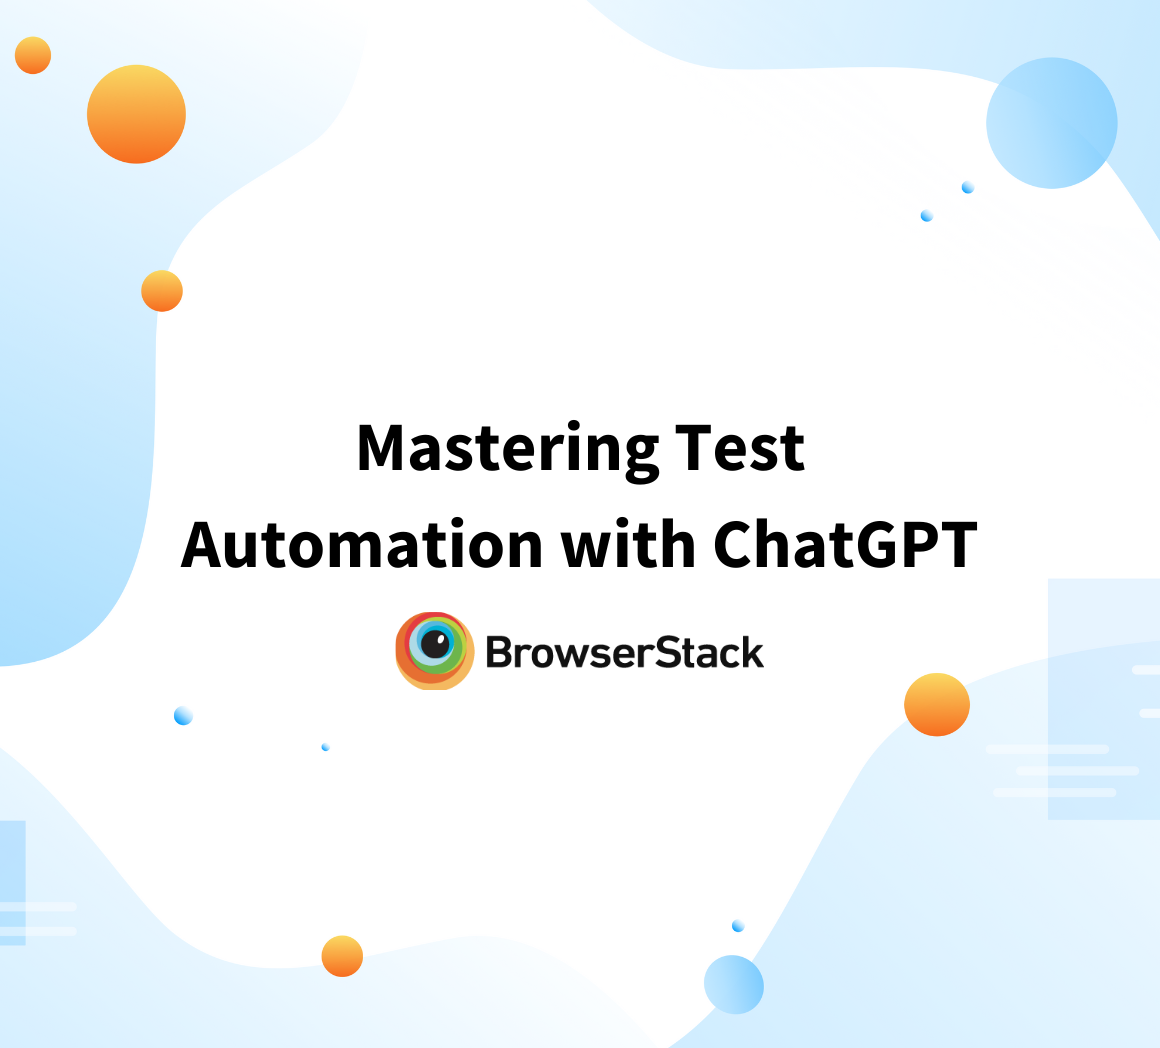 Mastering Test Automation with ChatGPT